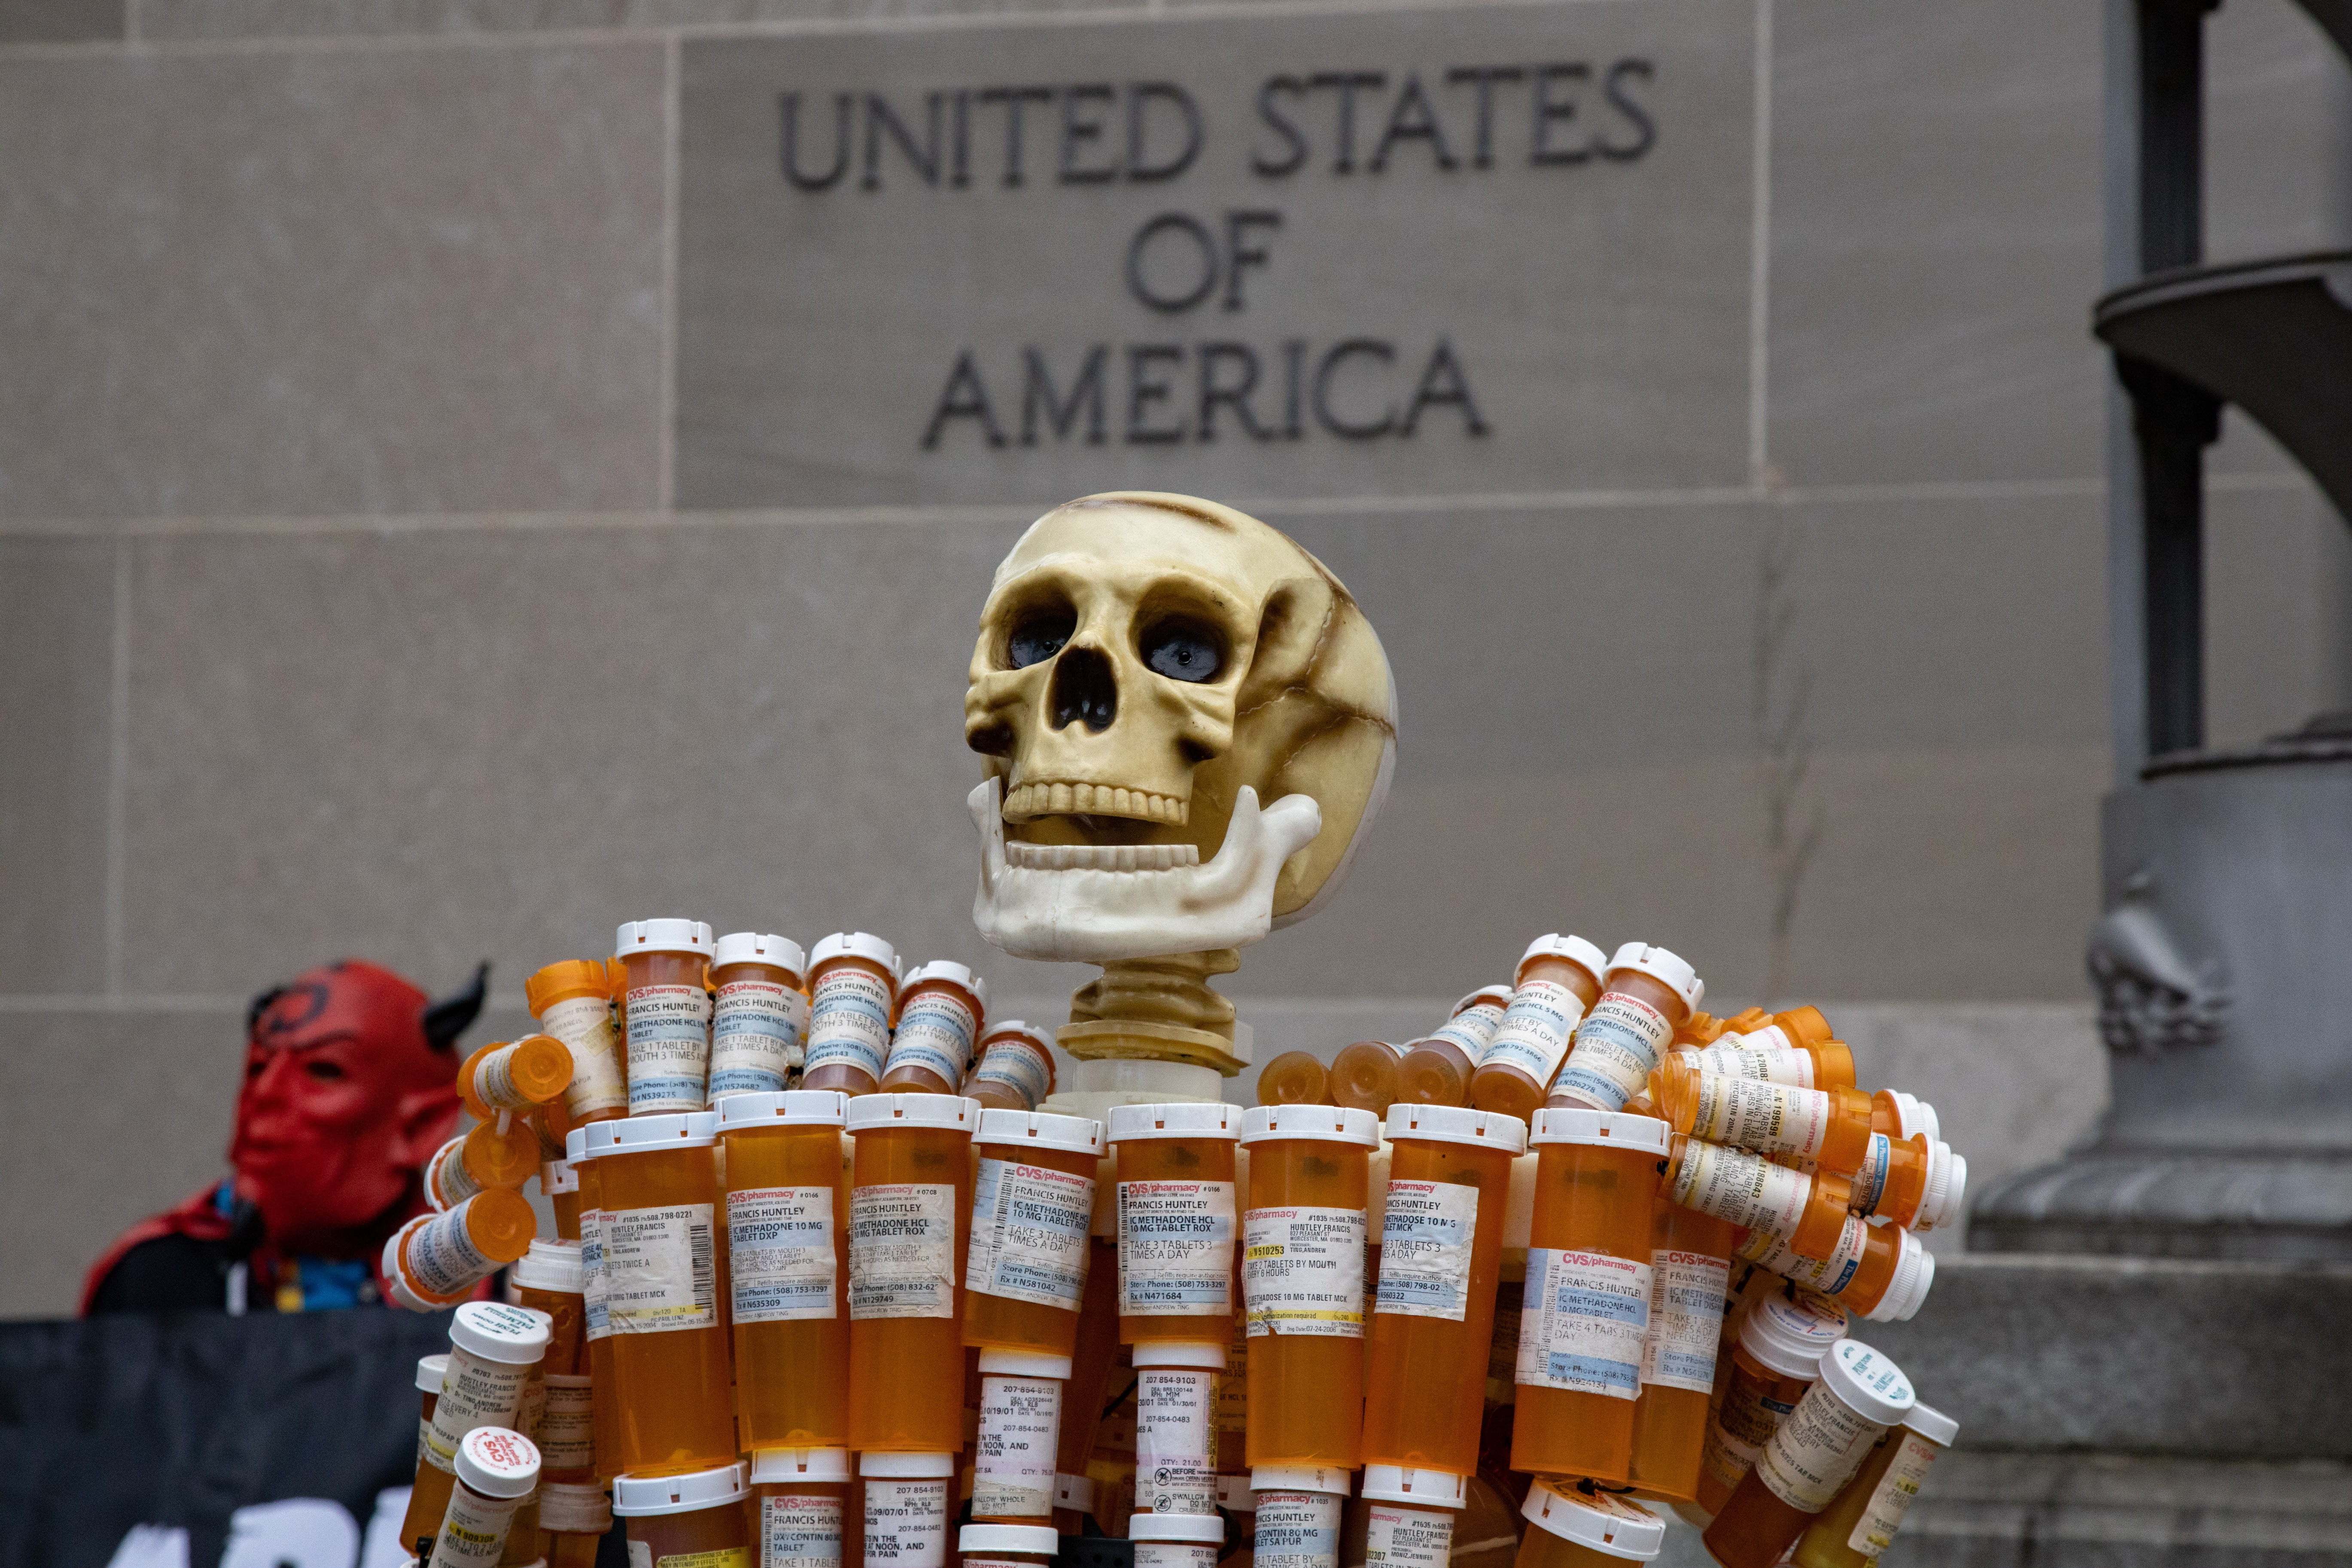 A sculpture created by Frank Huntley, also known as the "Pill Man", stands in front of the Department of Justice building in Washington, D.C. on December 3, 2021 during a protest.